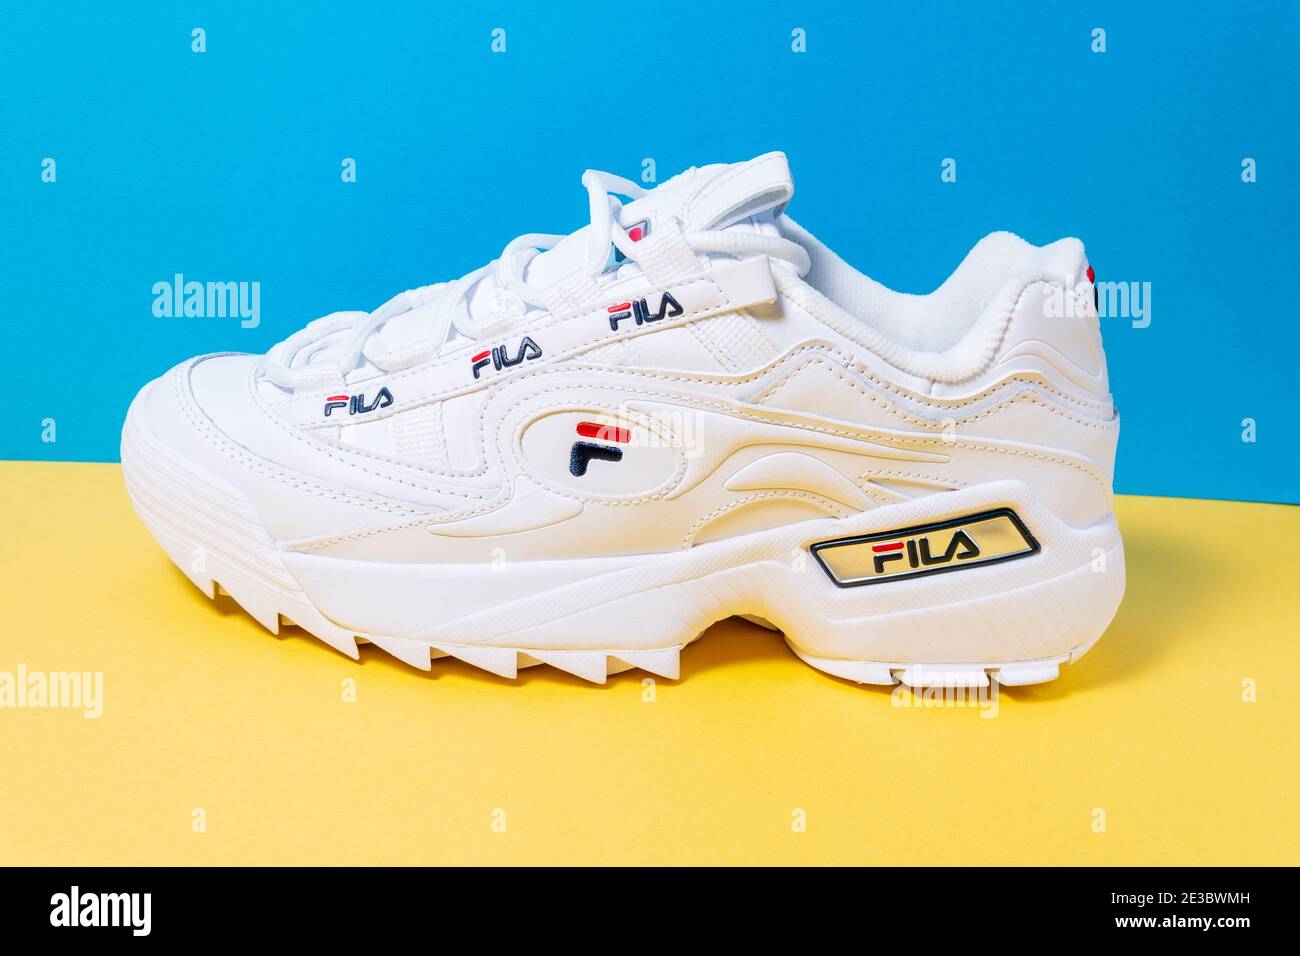 Tyumen, Russia-November 27, 2020: New Fila running shoes, white sneakers,  trainers shows logo Sport and casual footwear concept Stock Photo - Alamy